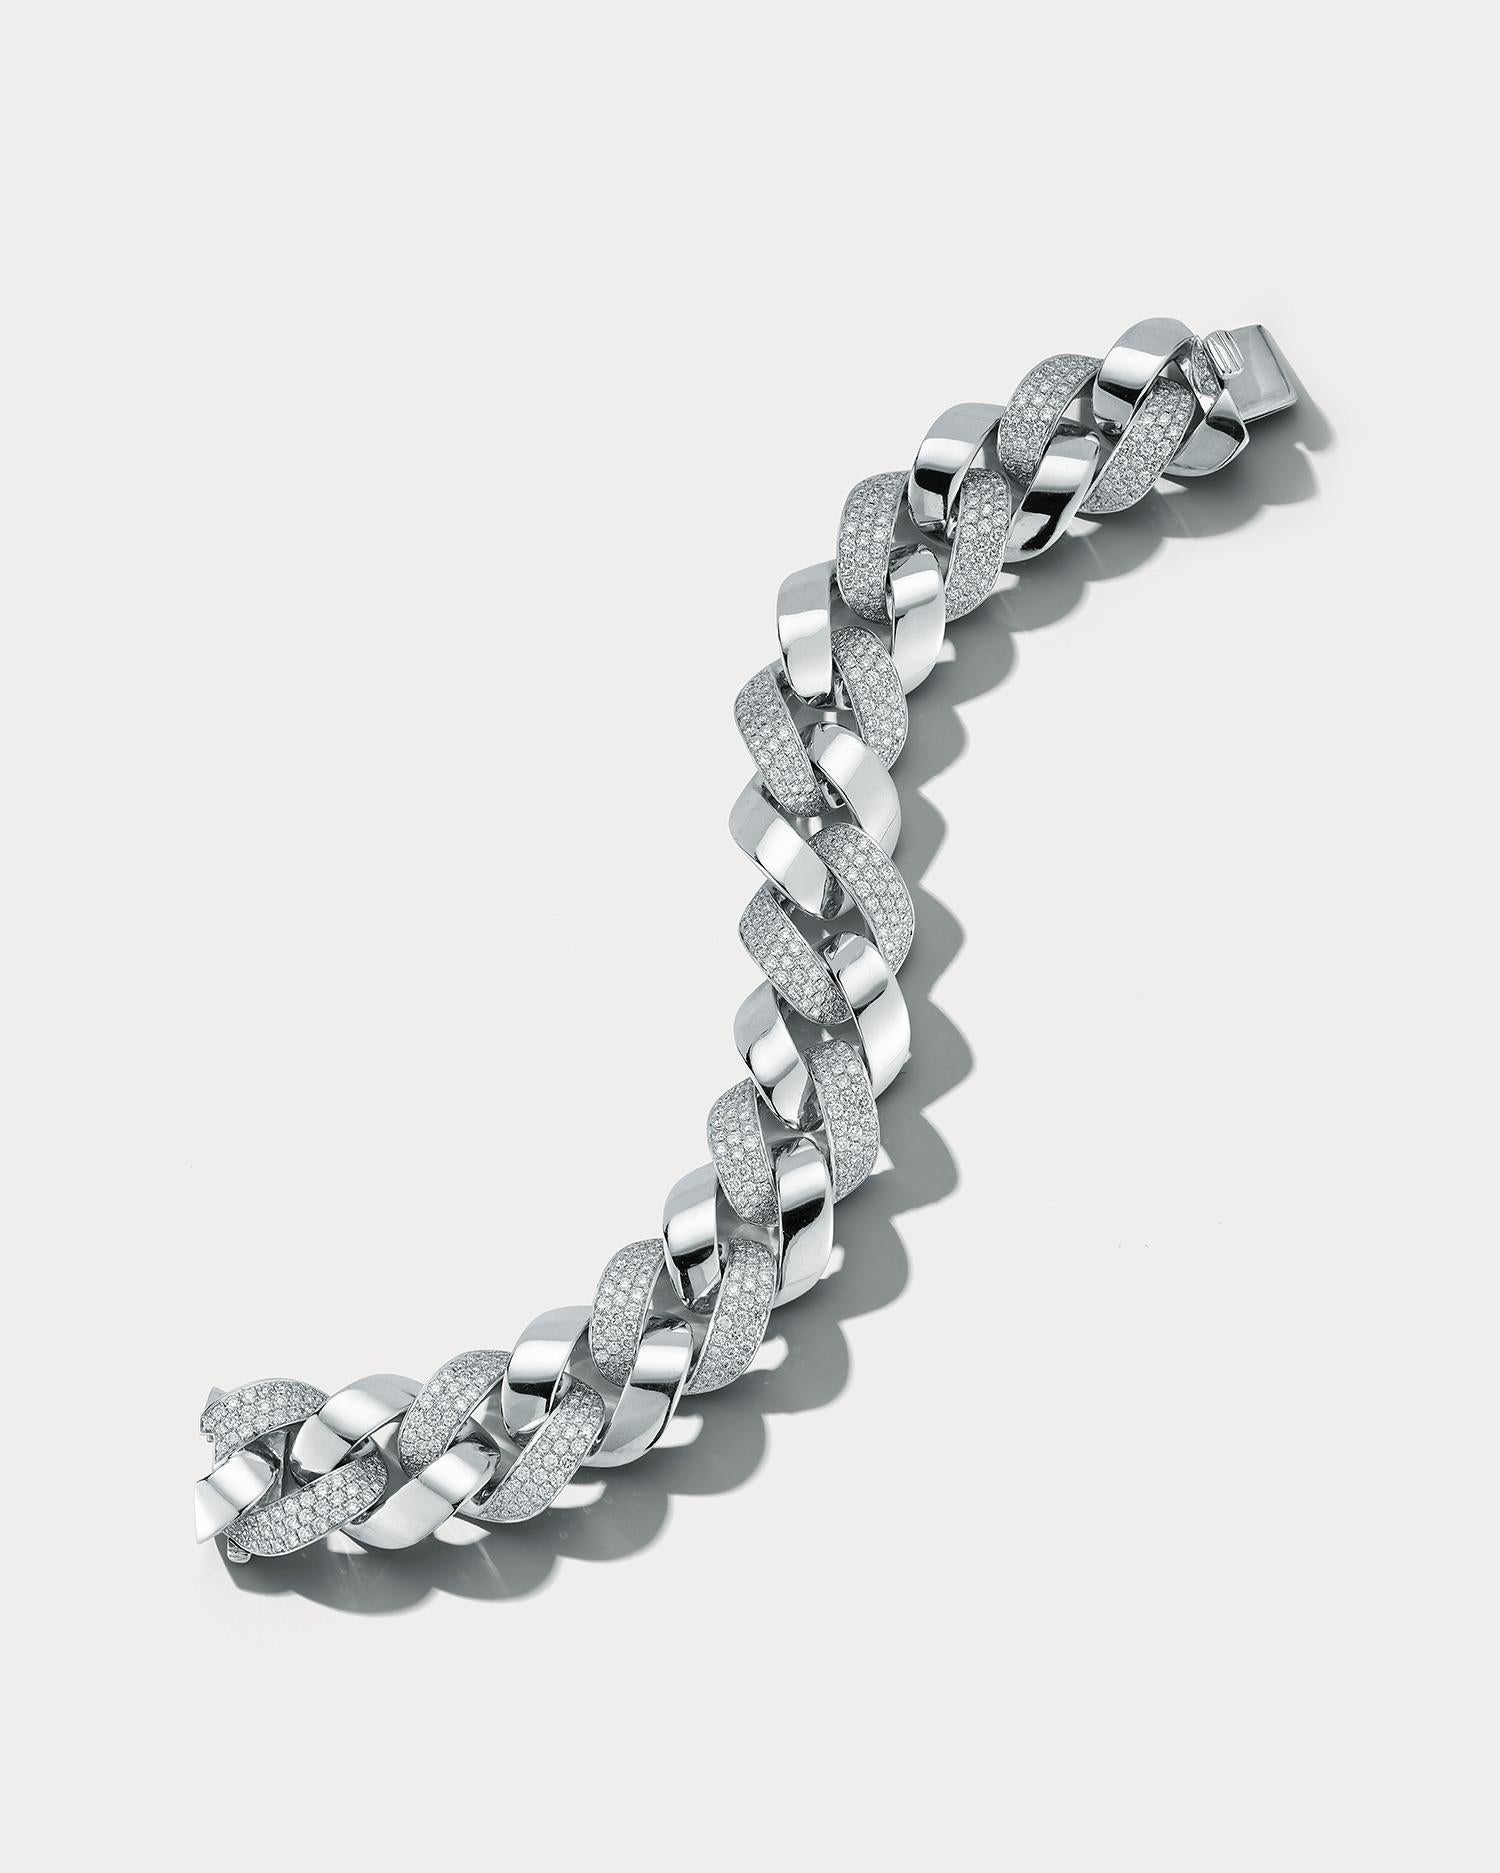 This exquisite Cuban link bracelet is a true statement piece that combines the luxury of white gold with the brilliance of diamonds. The bracelet is crafted from high-quality white gold, which has a bright and lustrous appearance that complements